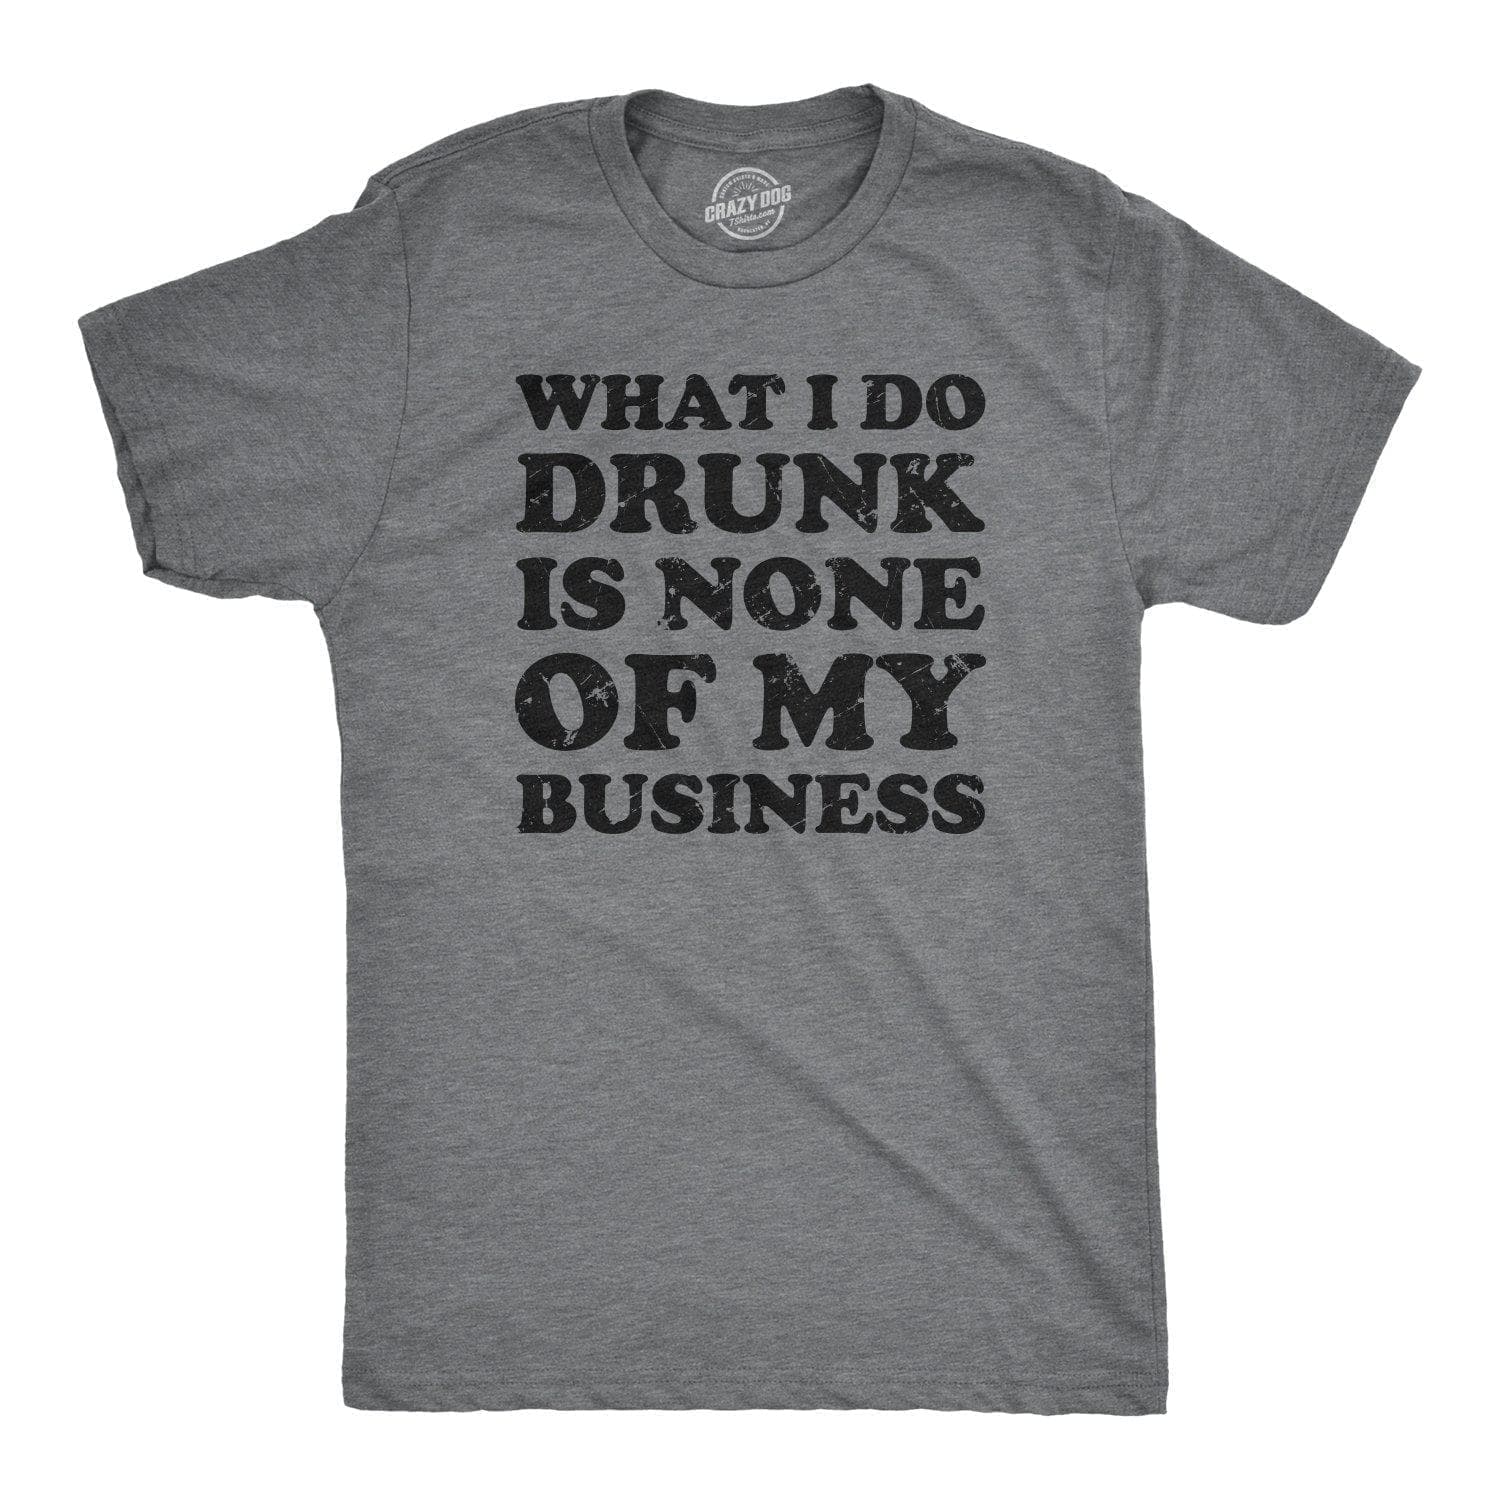 What I Do Drunk Is None Of My Business Men's Tshirt  -  Crazy Dog T-Shirts